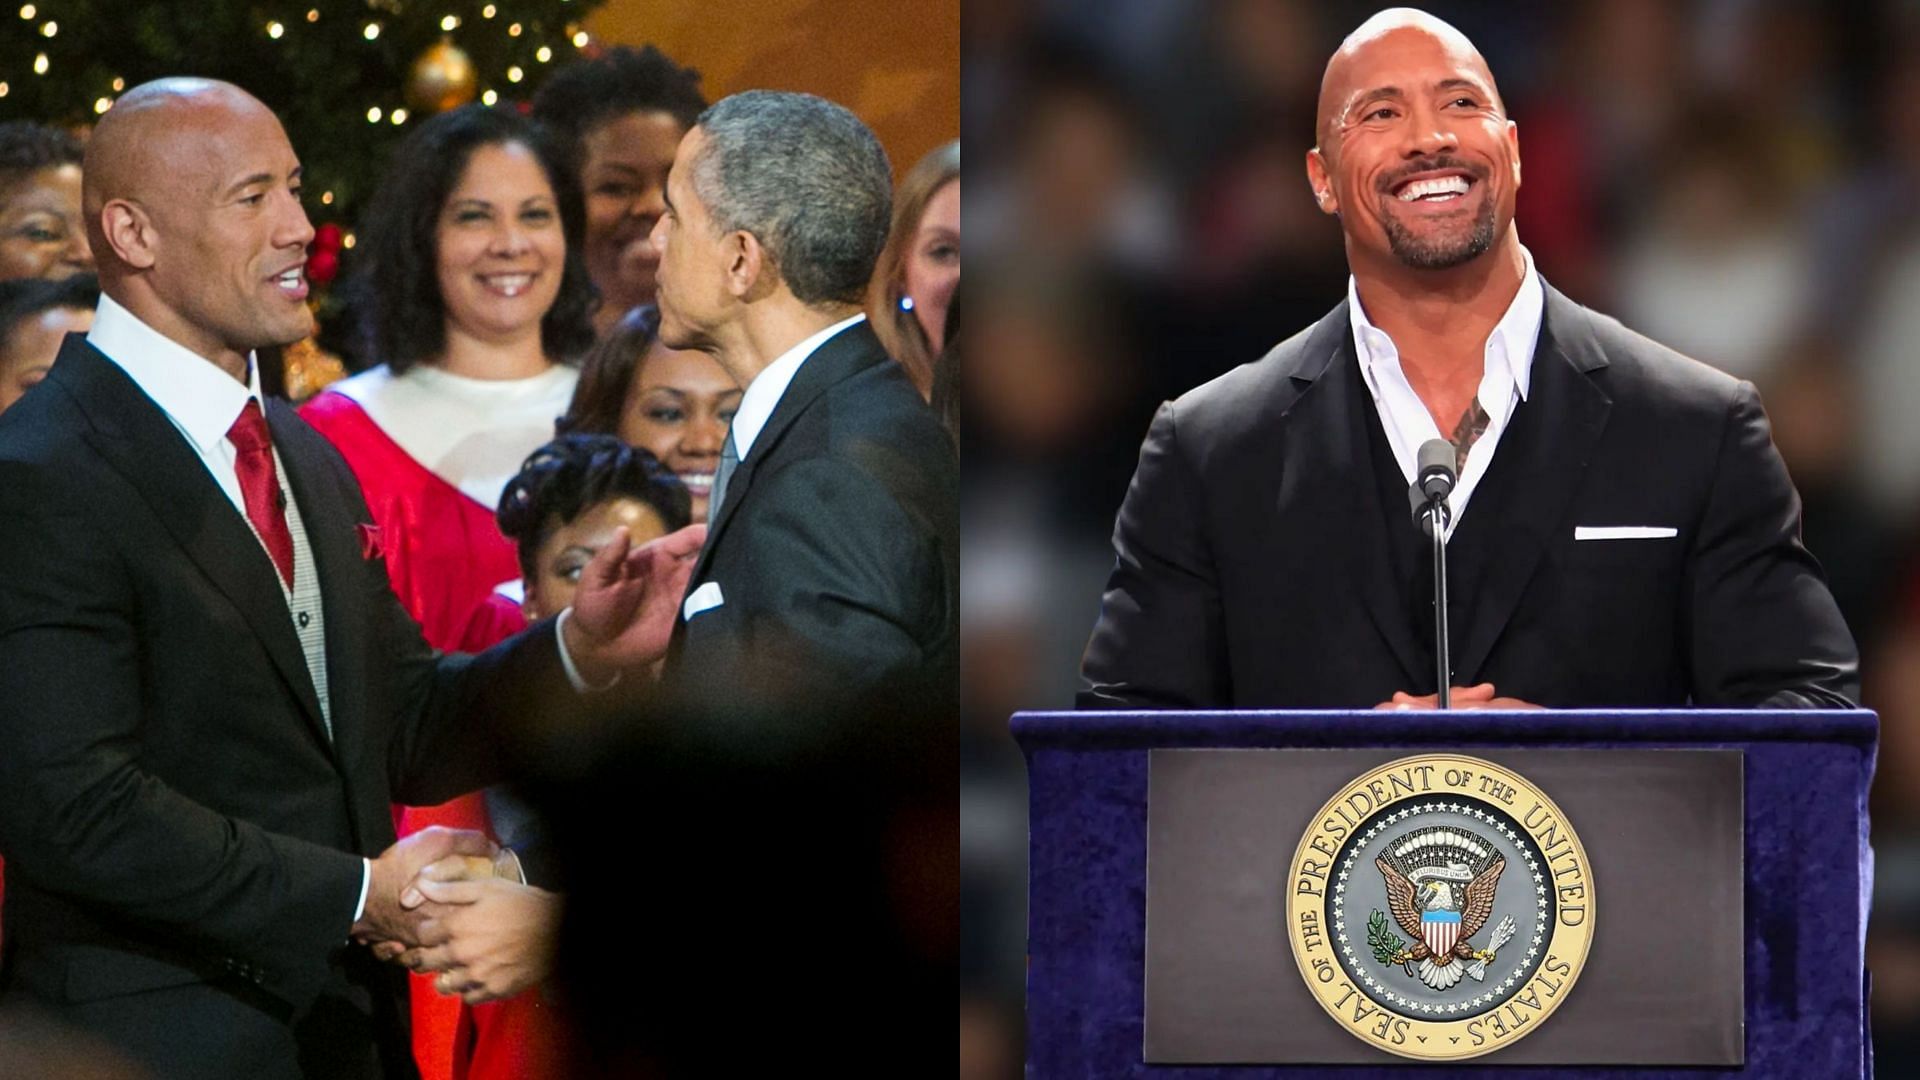 The Rock recently addressed running for President of the United States